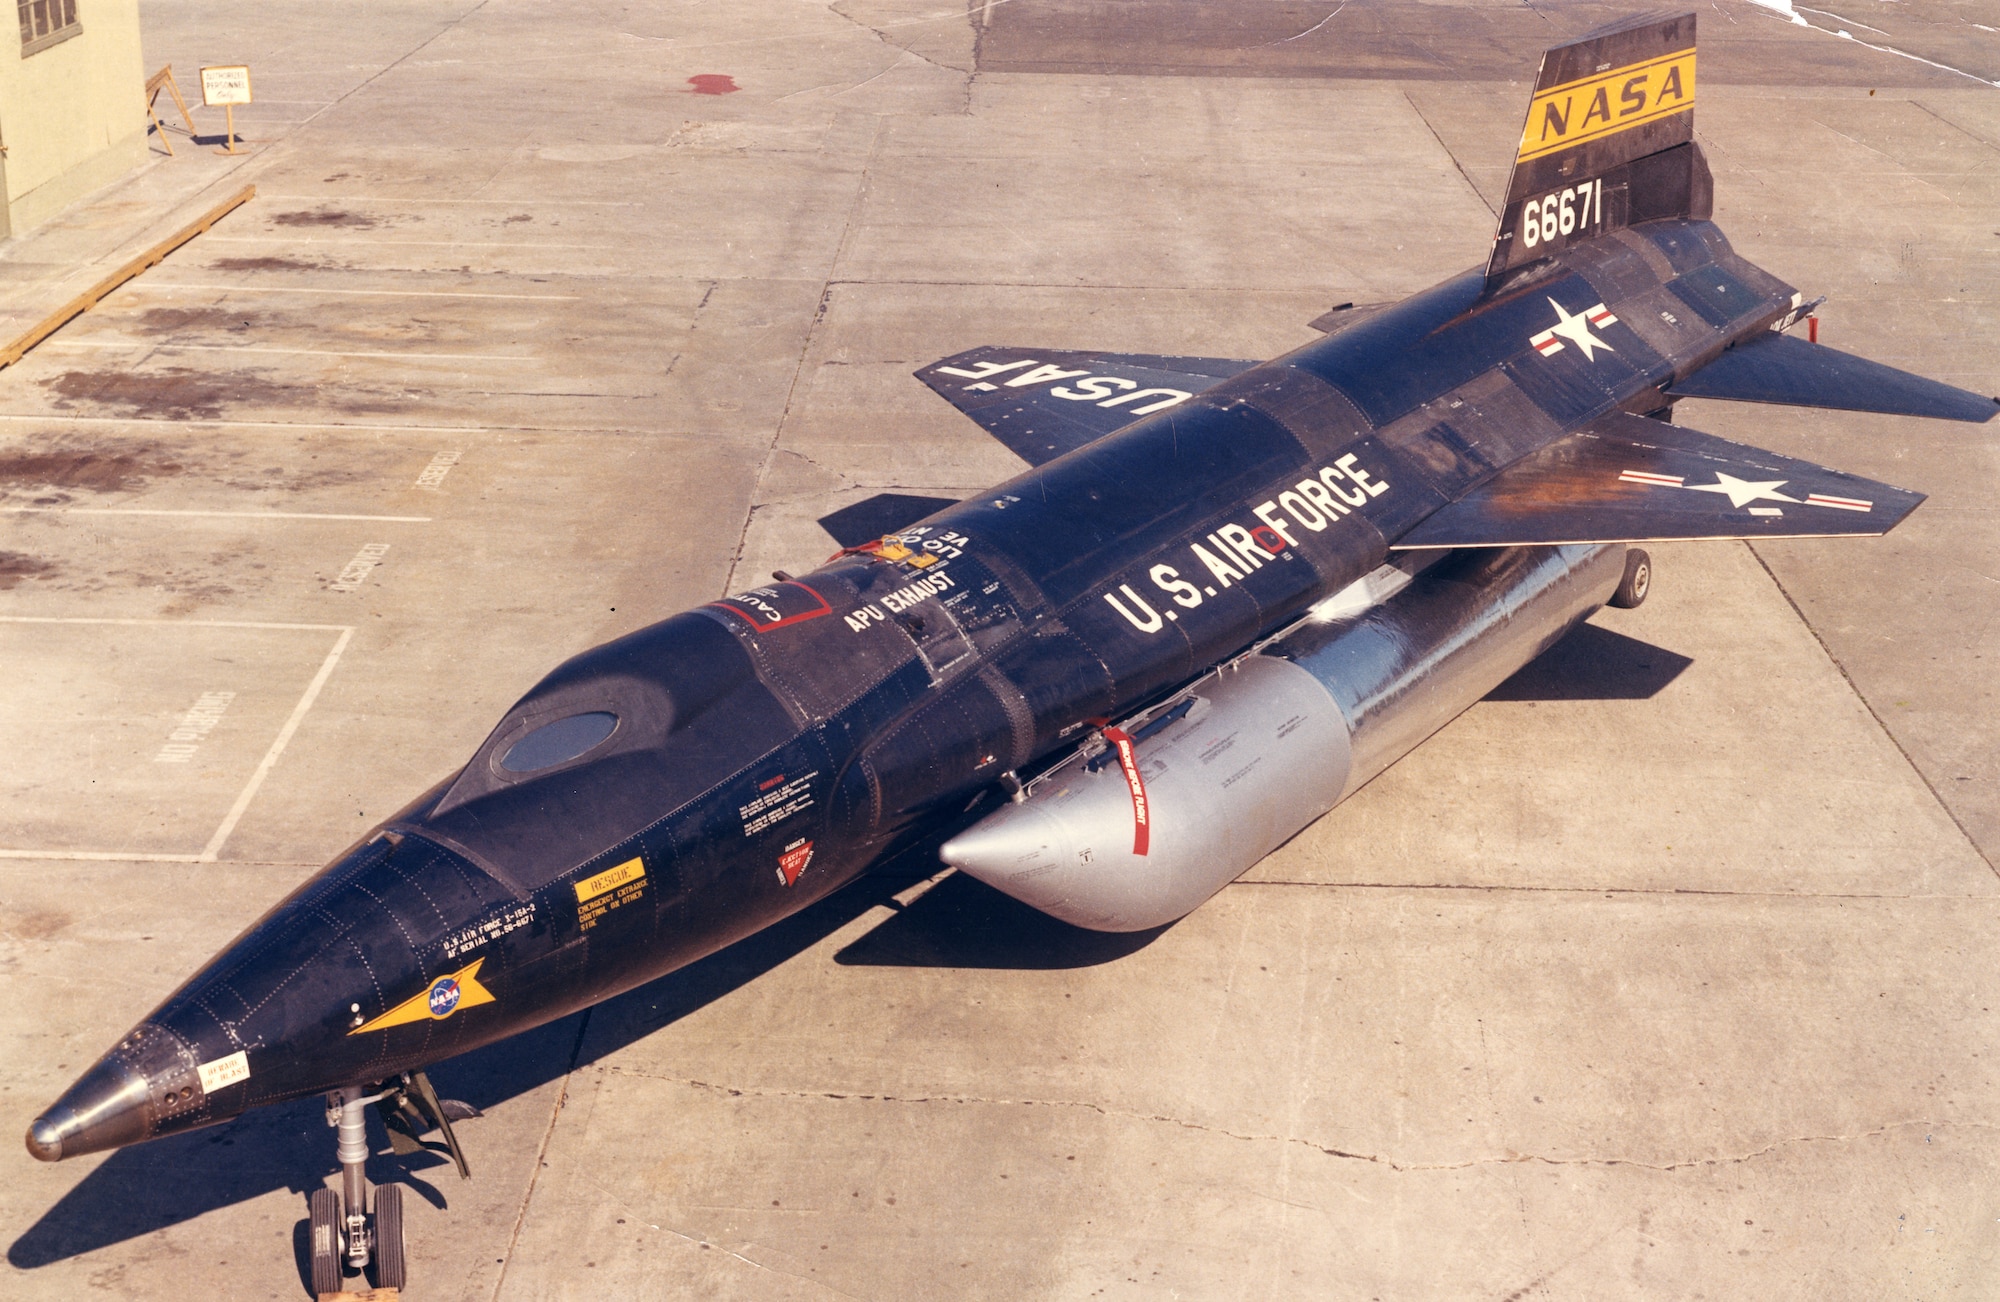 North American X-15A-2 shown with two external fuel tanks. (U.S. Air Force photo)